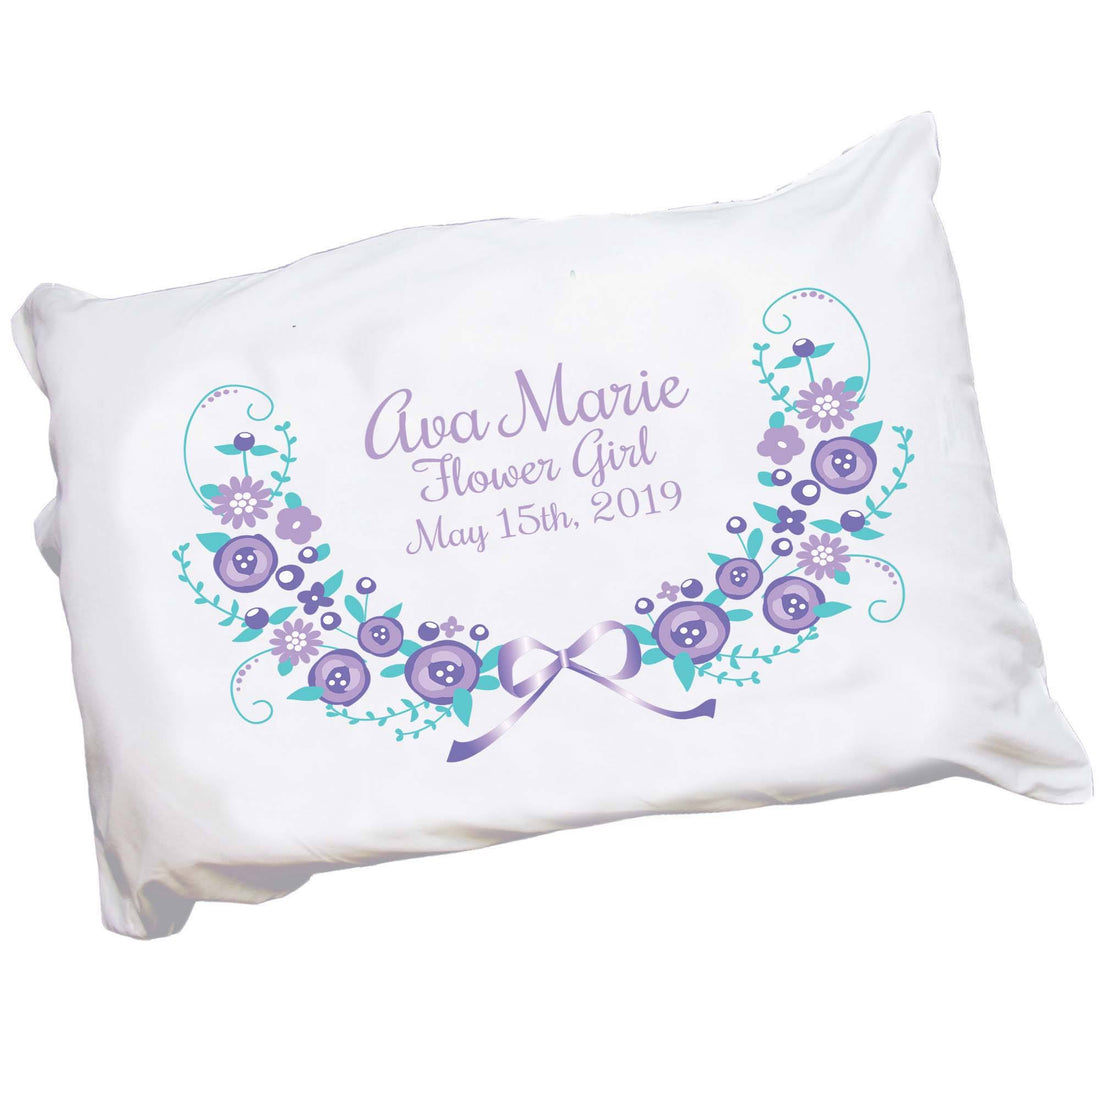 Personalized Childrens Pillowcase with Lavender Floral Garland design